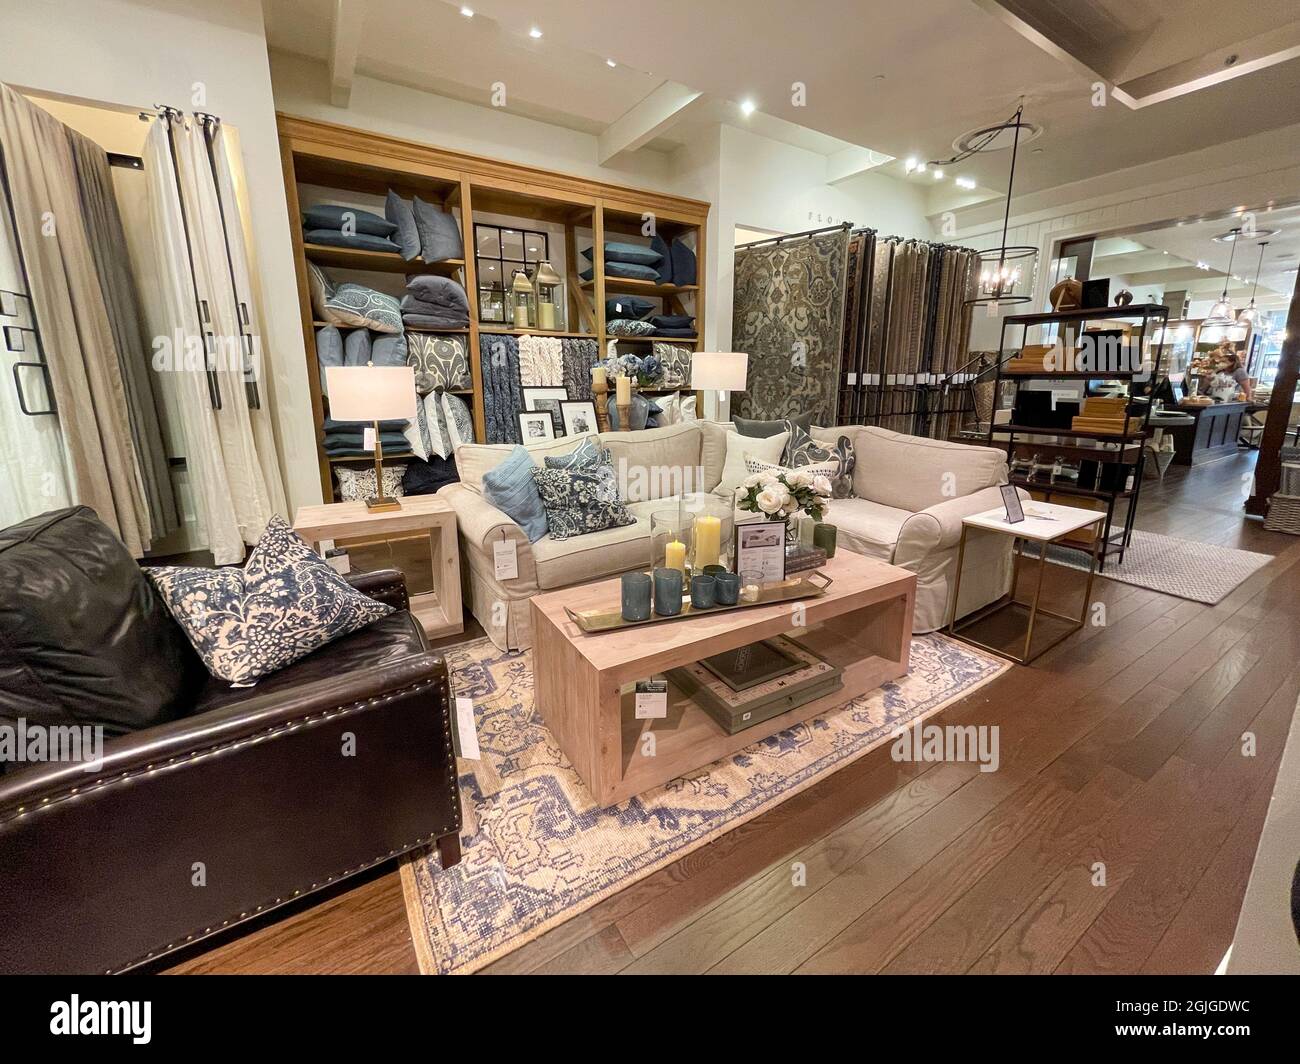 Pottery Barn Home Decor and Accessories Store, NYC Stock Photo - Alamy